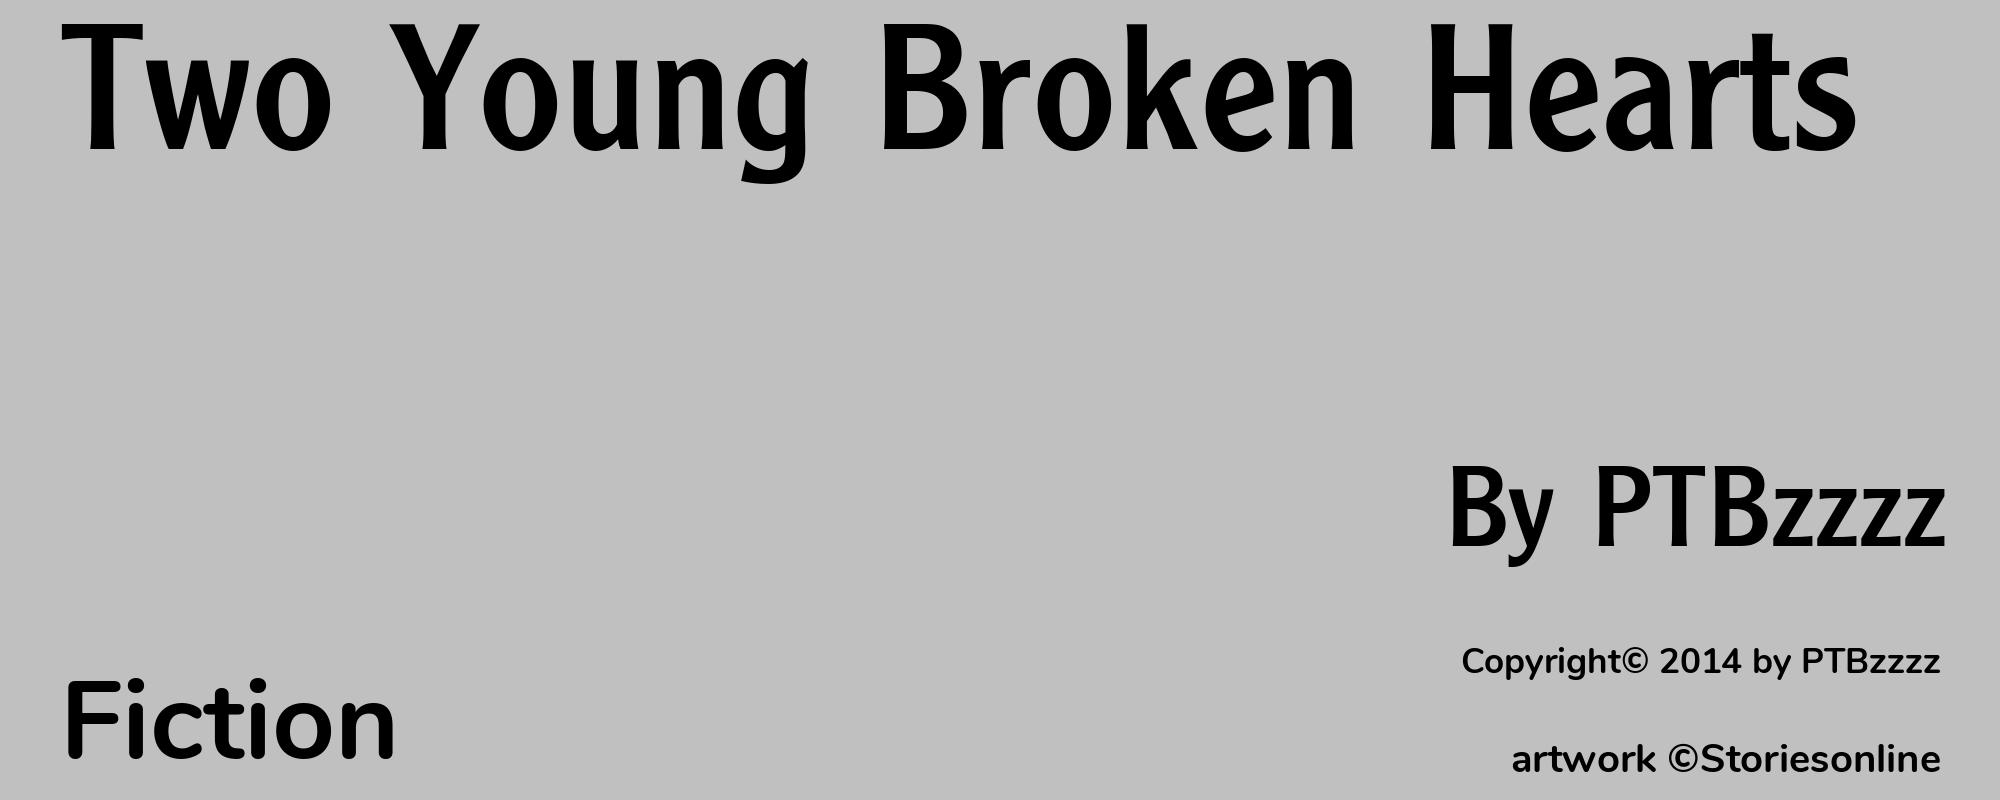 Two Young Broken Hearts - Cover